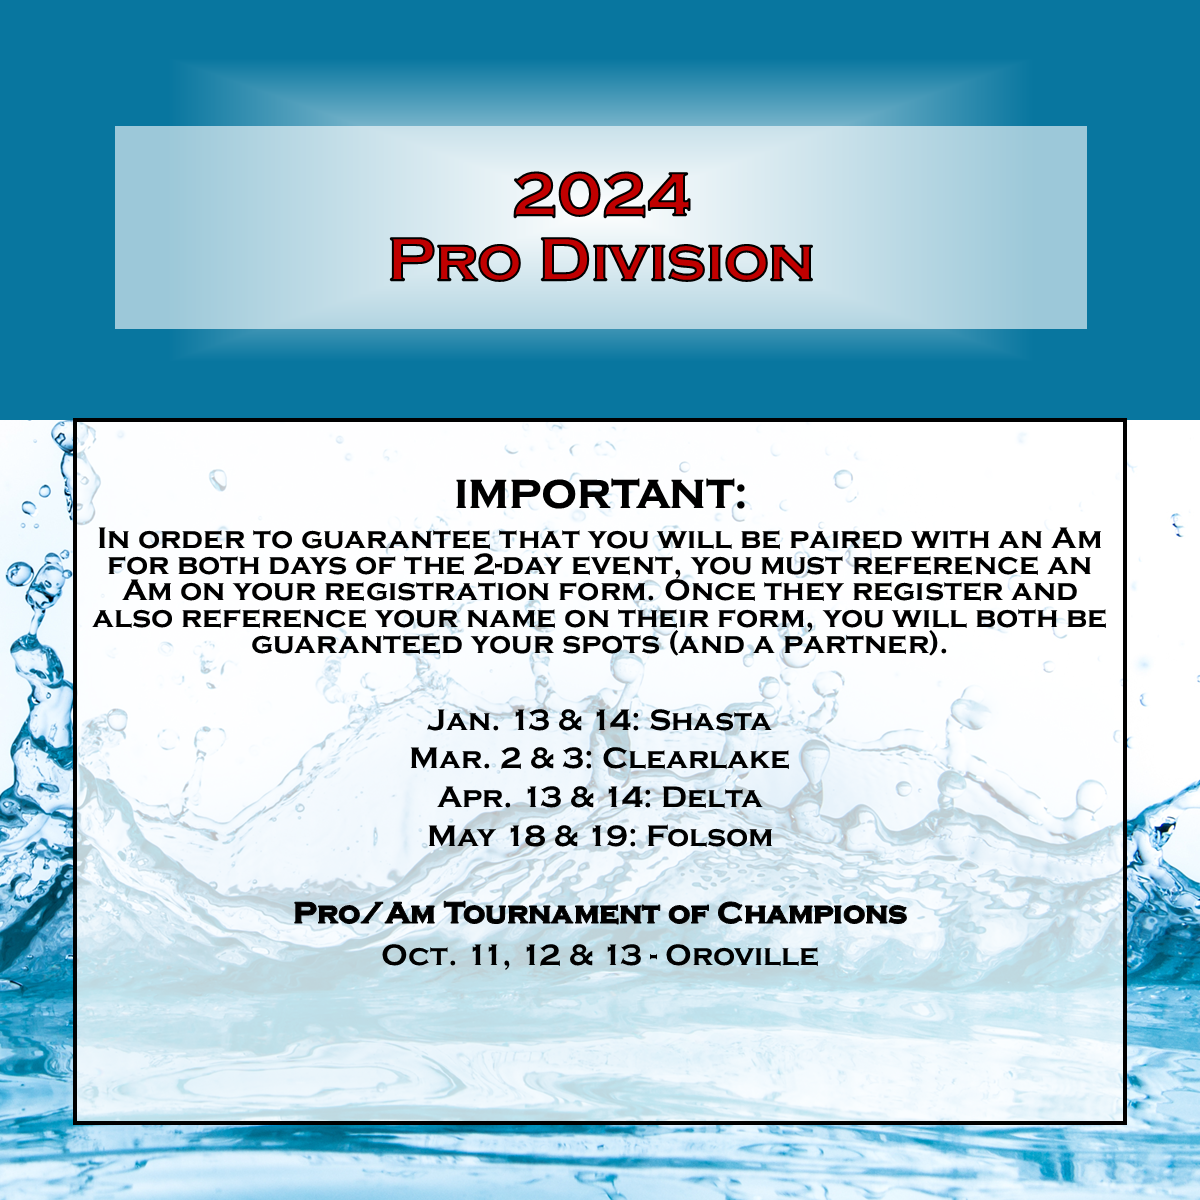 Pro Division Entry: Folsom - May 18 & 19, 2024